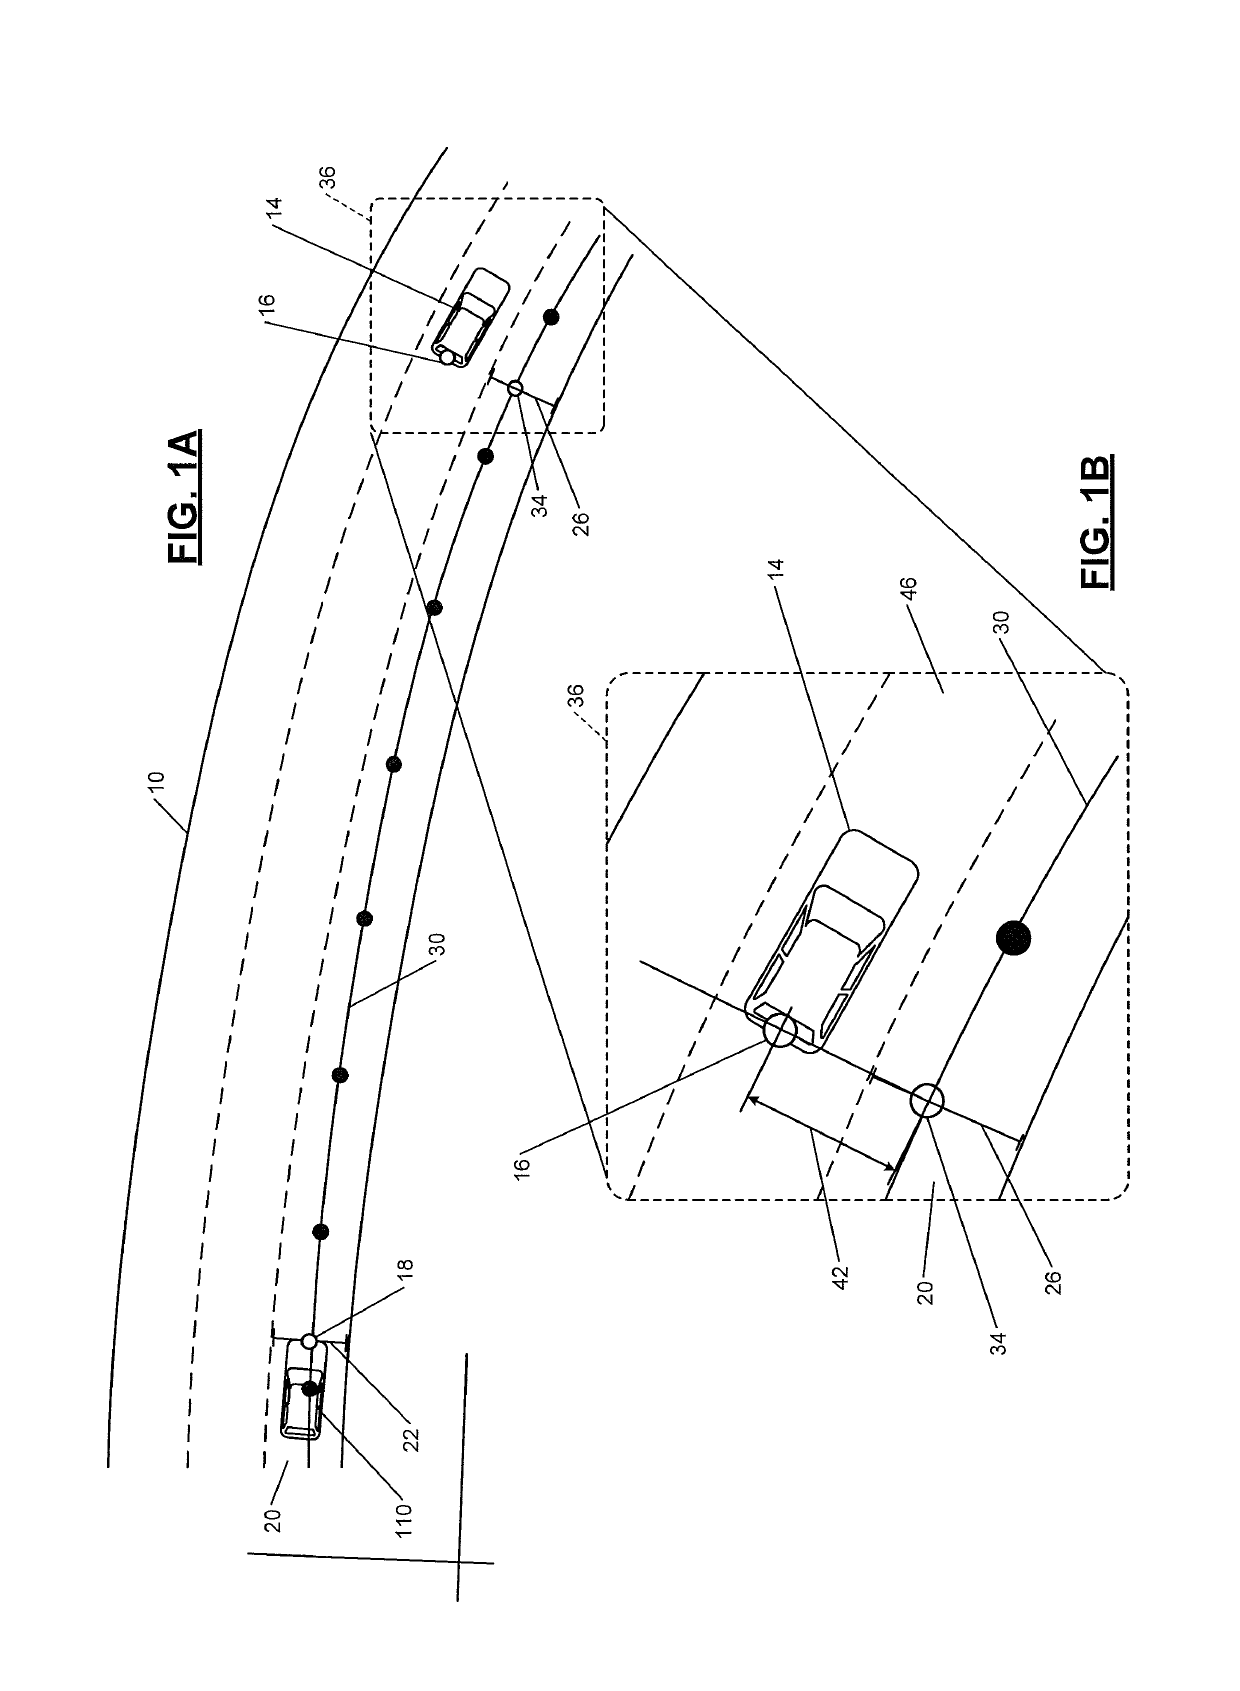 Systems and methods for providing relative lane assignment of objects at distances from the vehicle